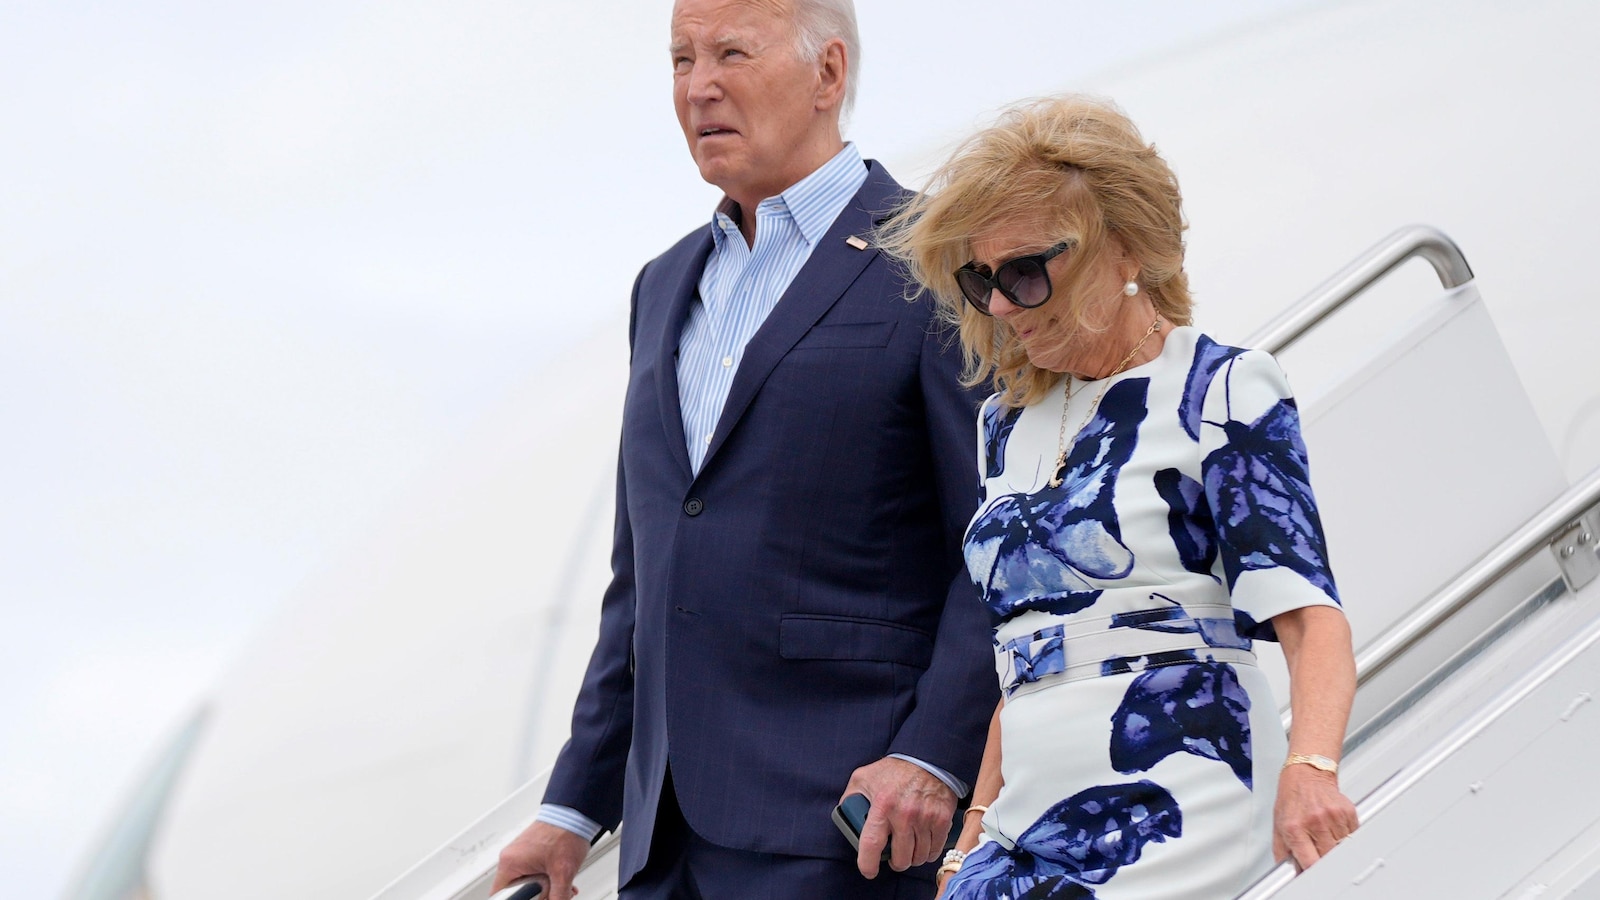 Biden tries to recapture his mojo in appeals to donors